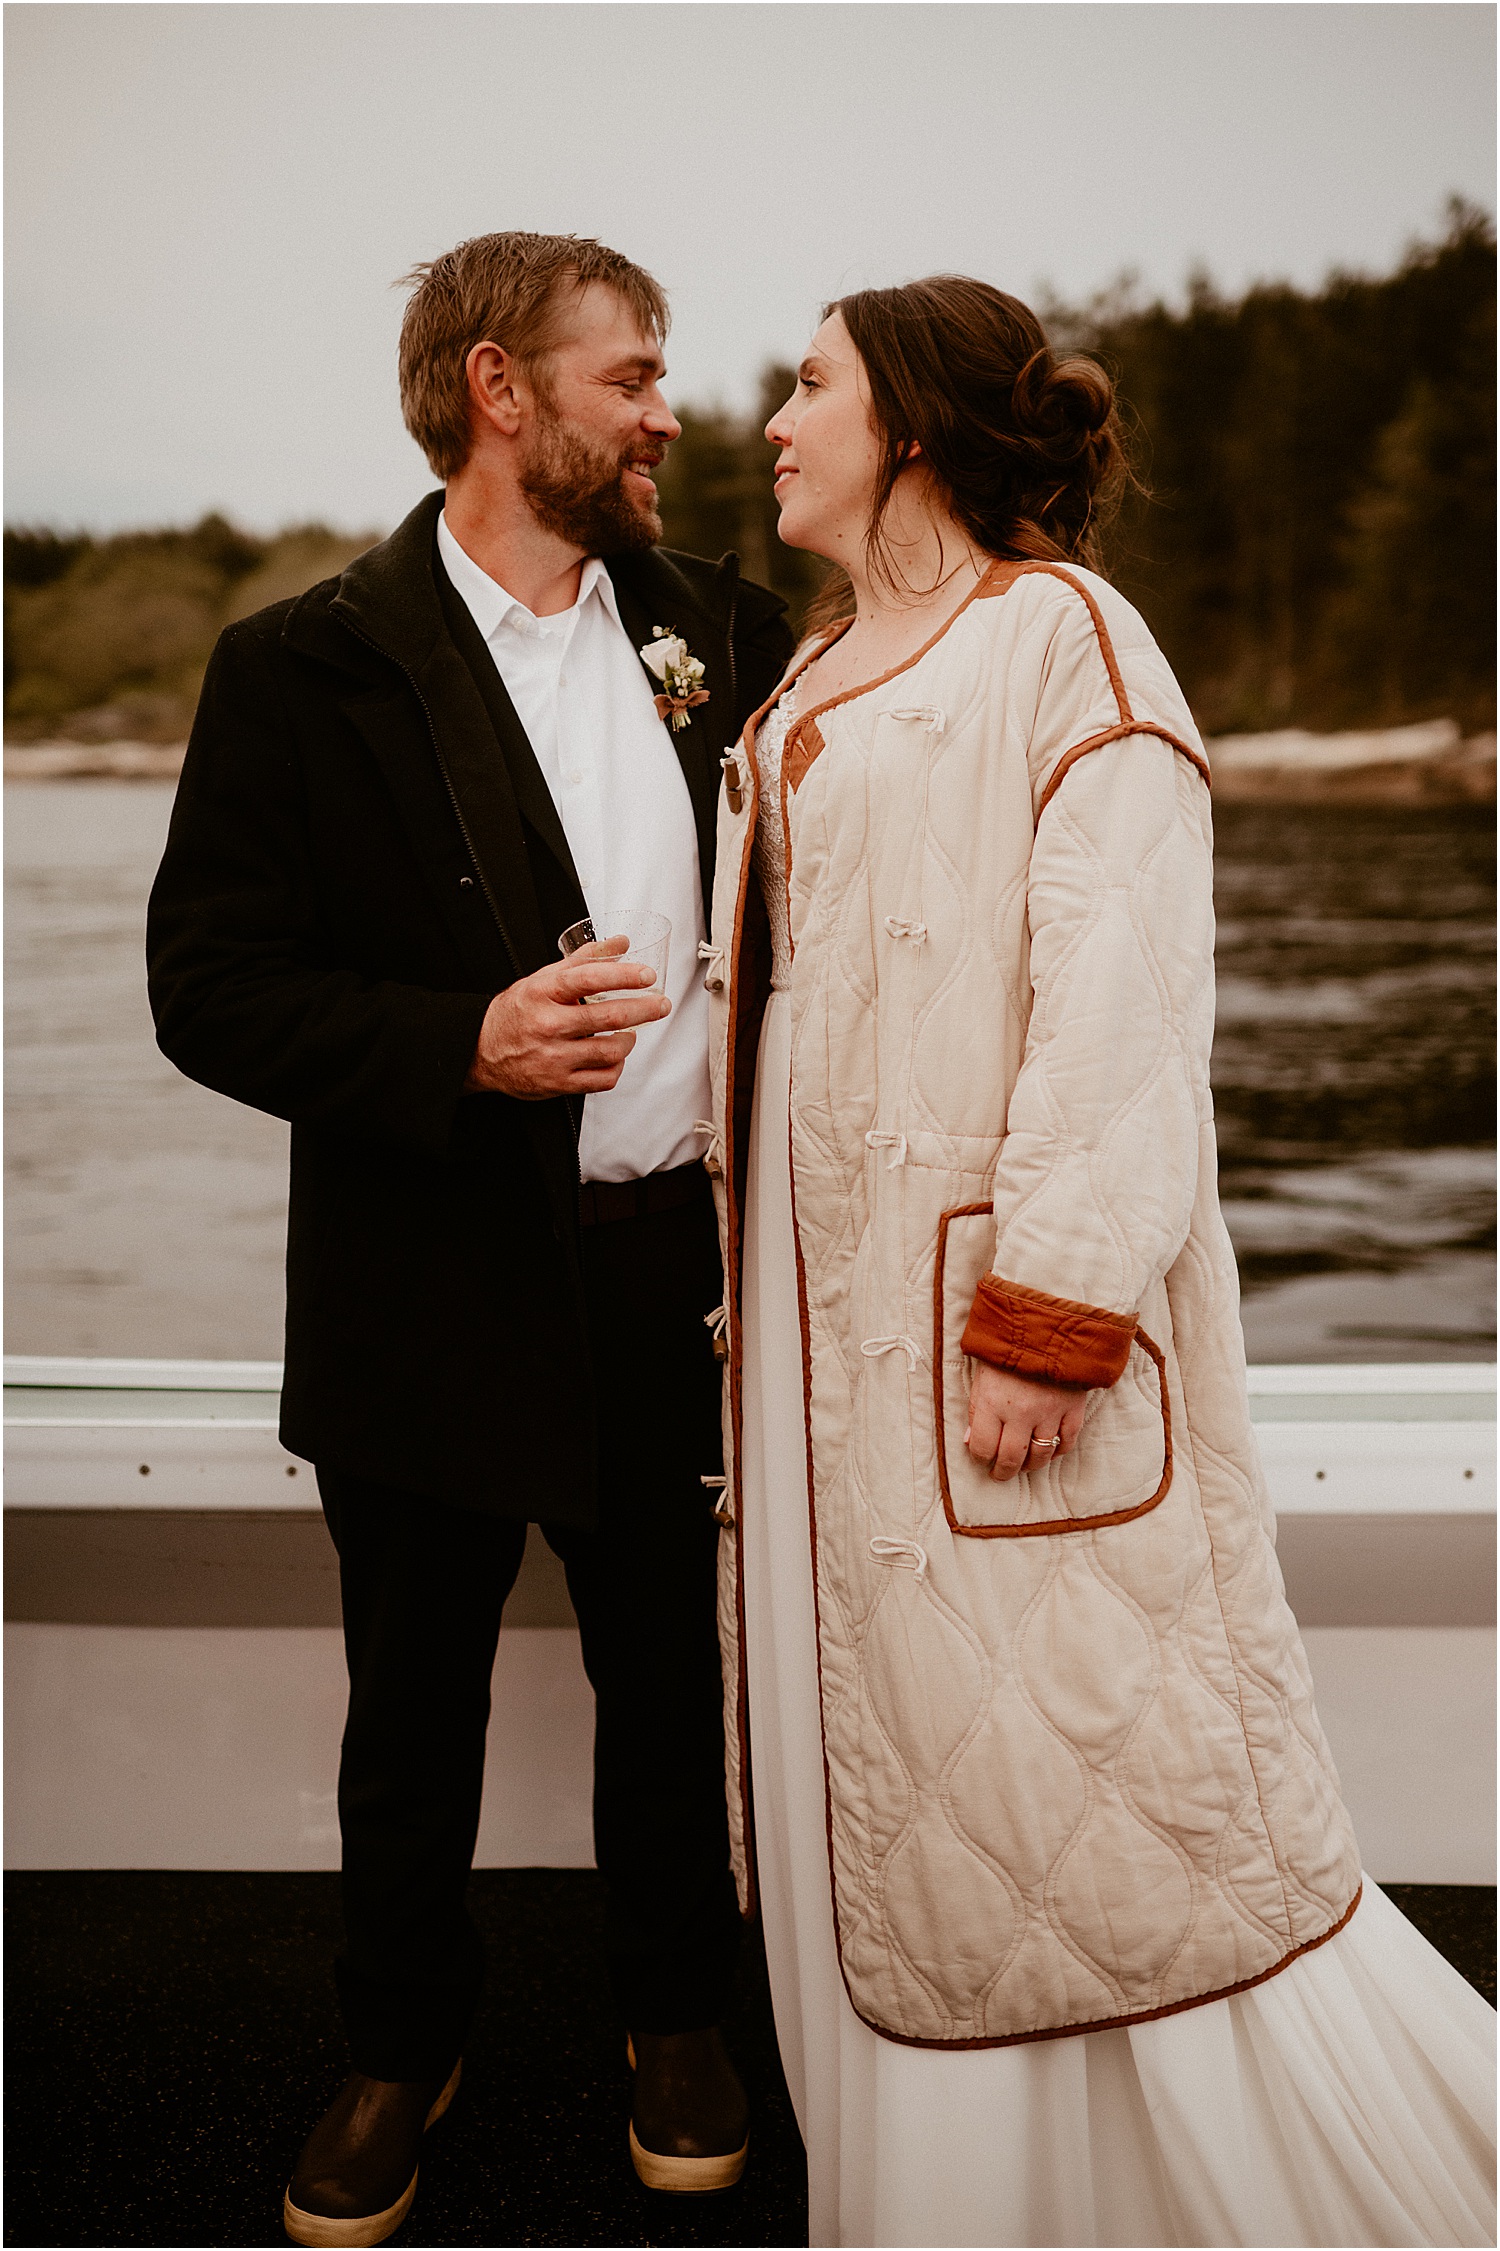 Husband and wife stare at one another for Katelyn Mallett Photography